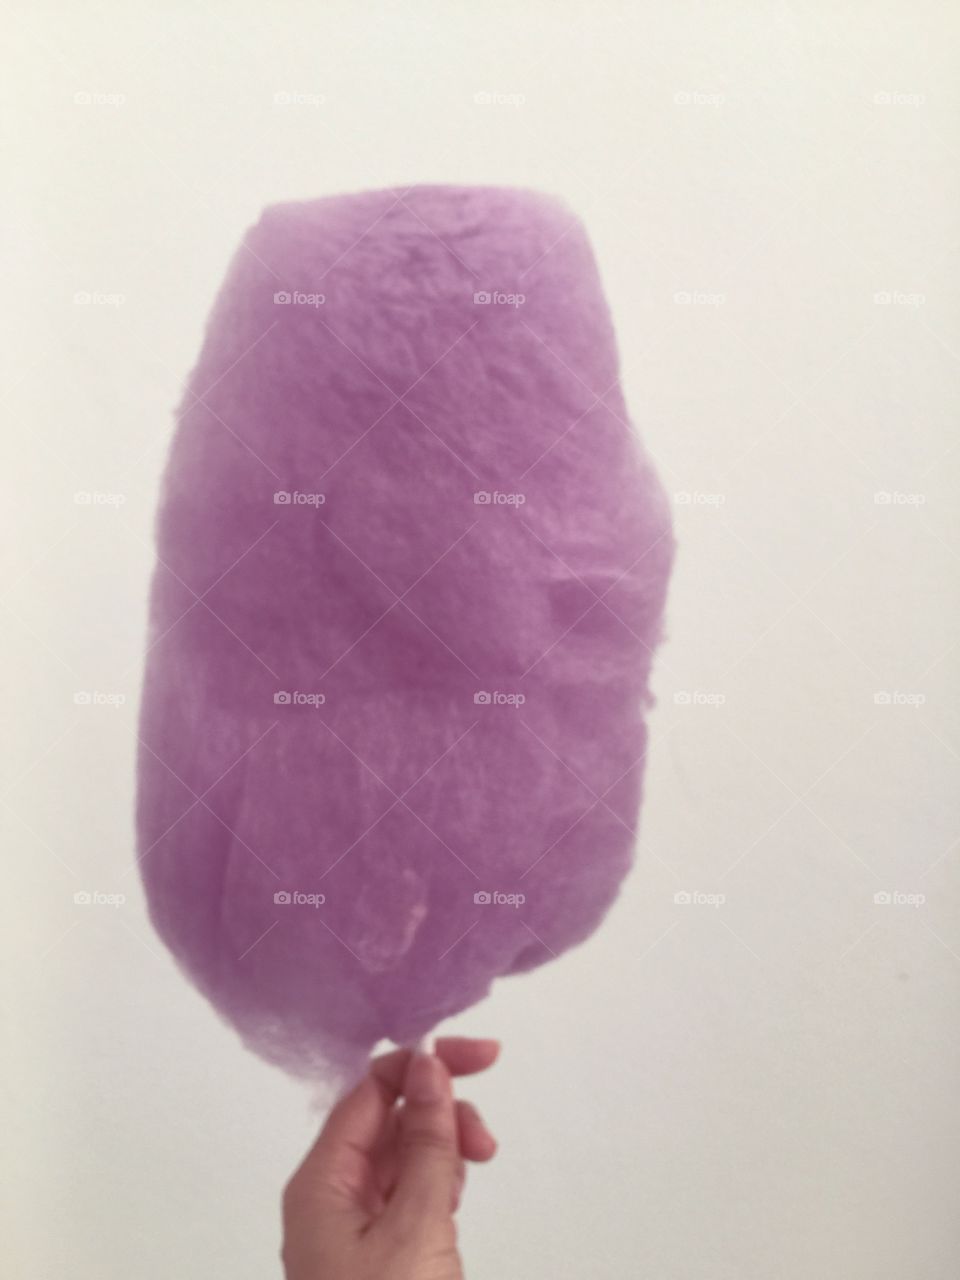 Blueberry coton candy 